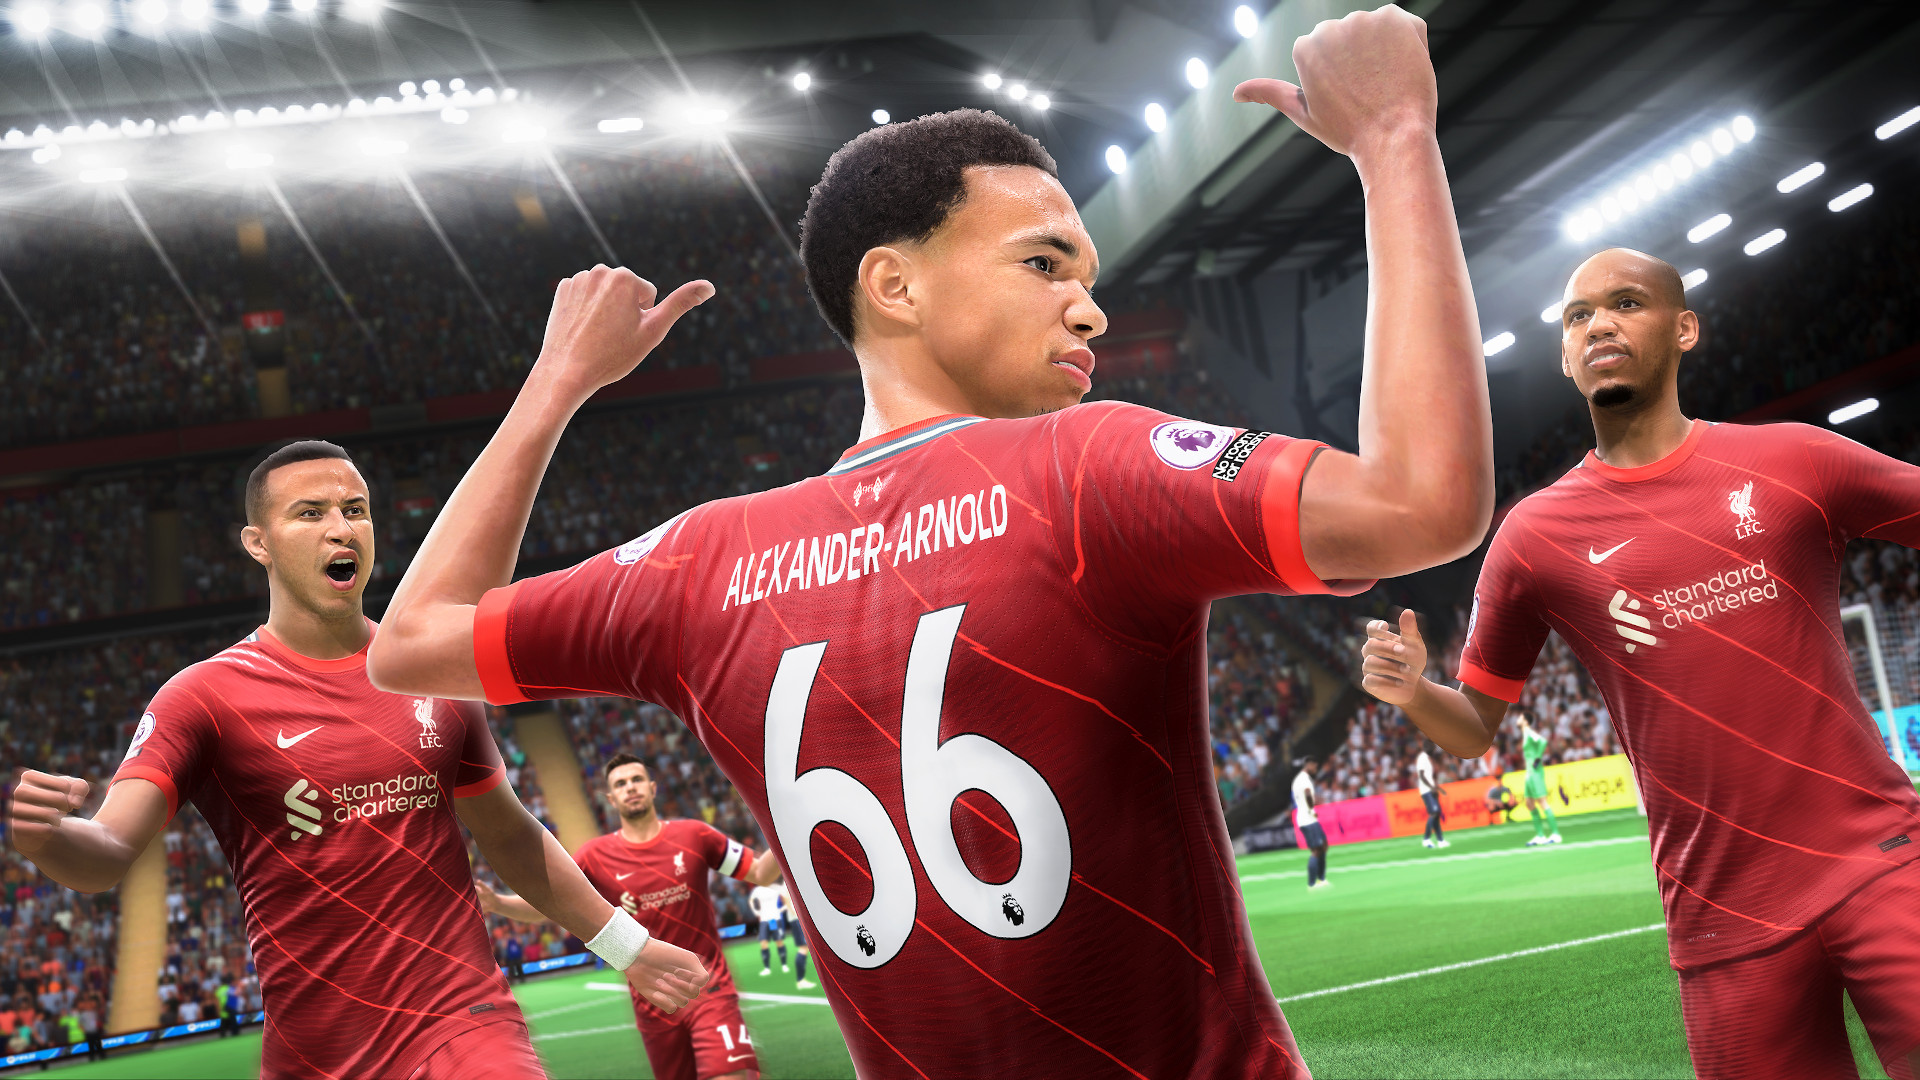 FIFA 22 release date: Trent Alexander-Arnold celebrates a goal by pointing to the back of his Liverpool shirt.